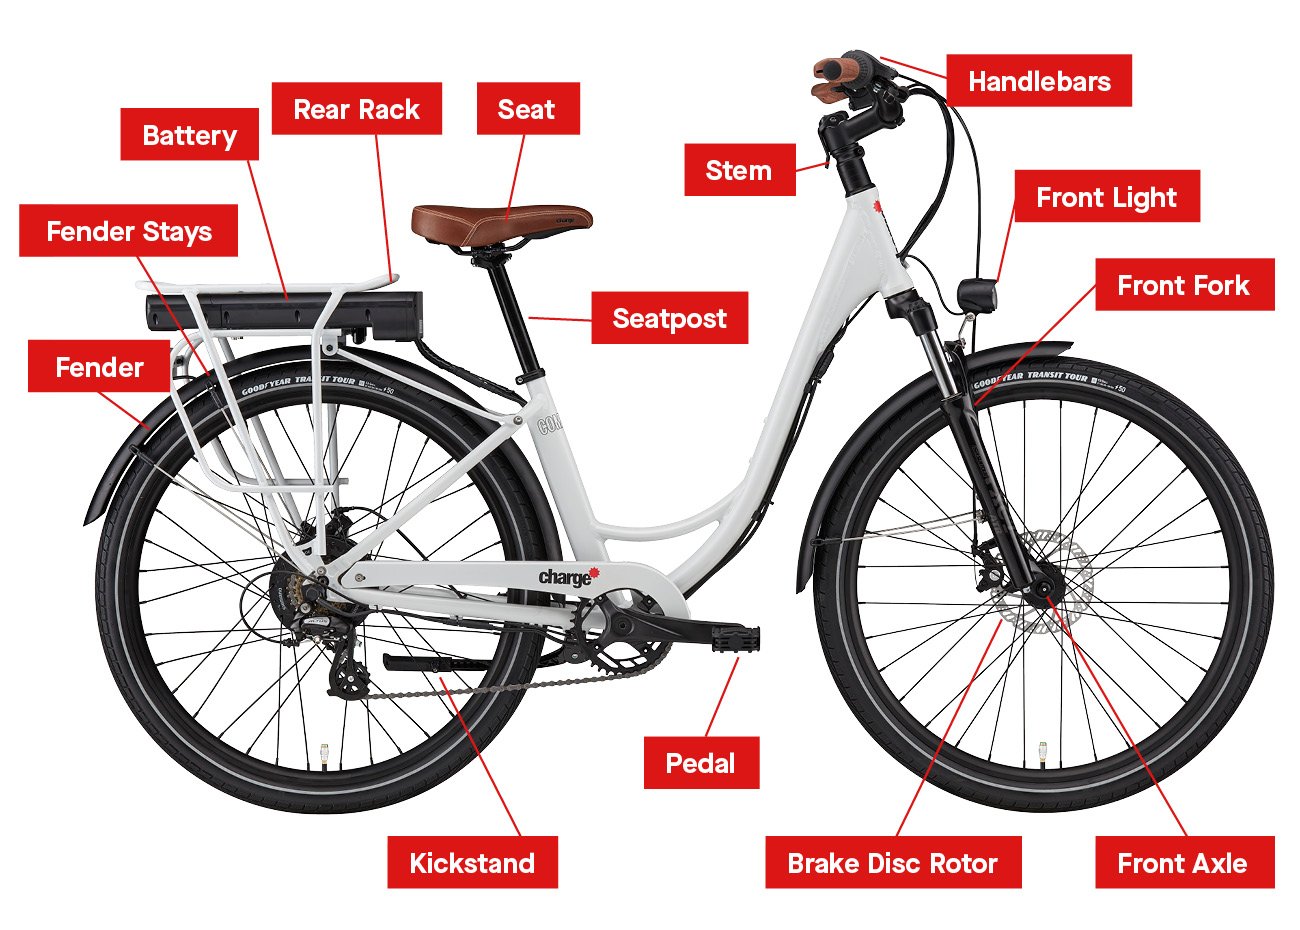 Key Components of Charge Comfort electric bike